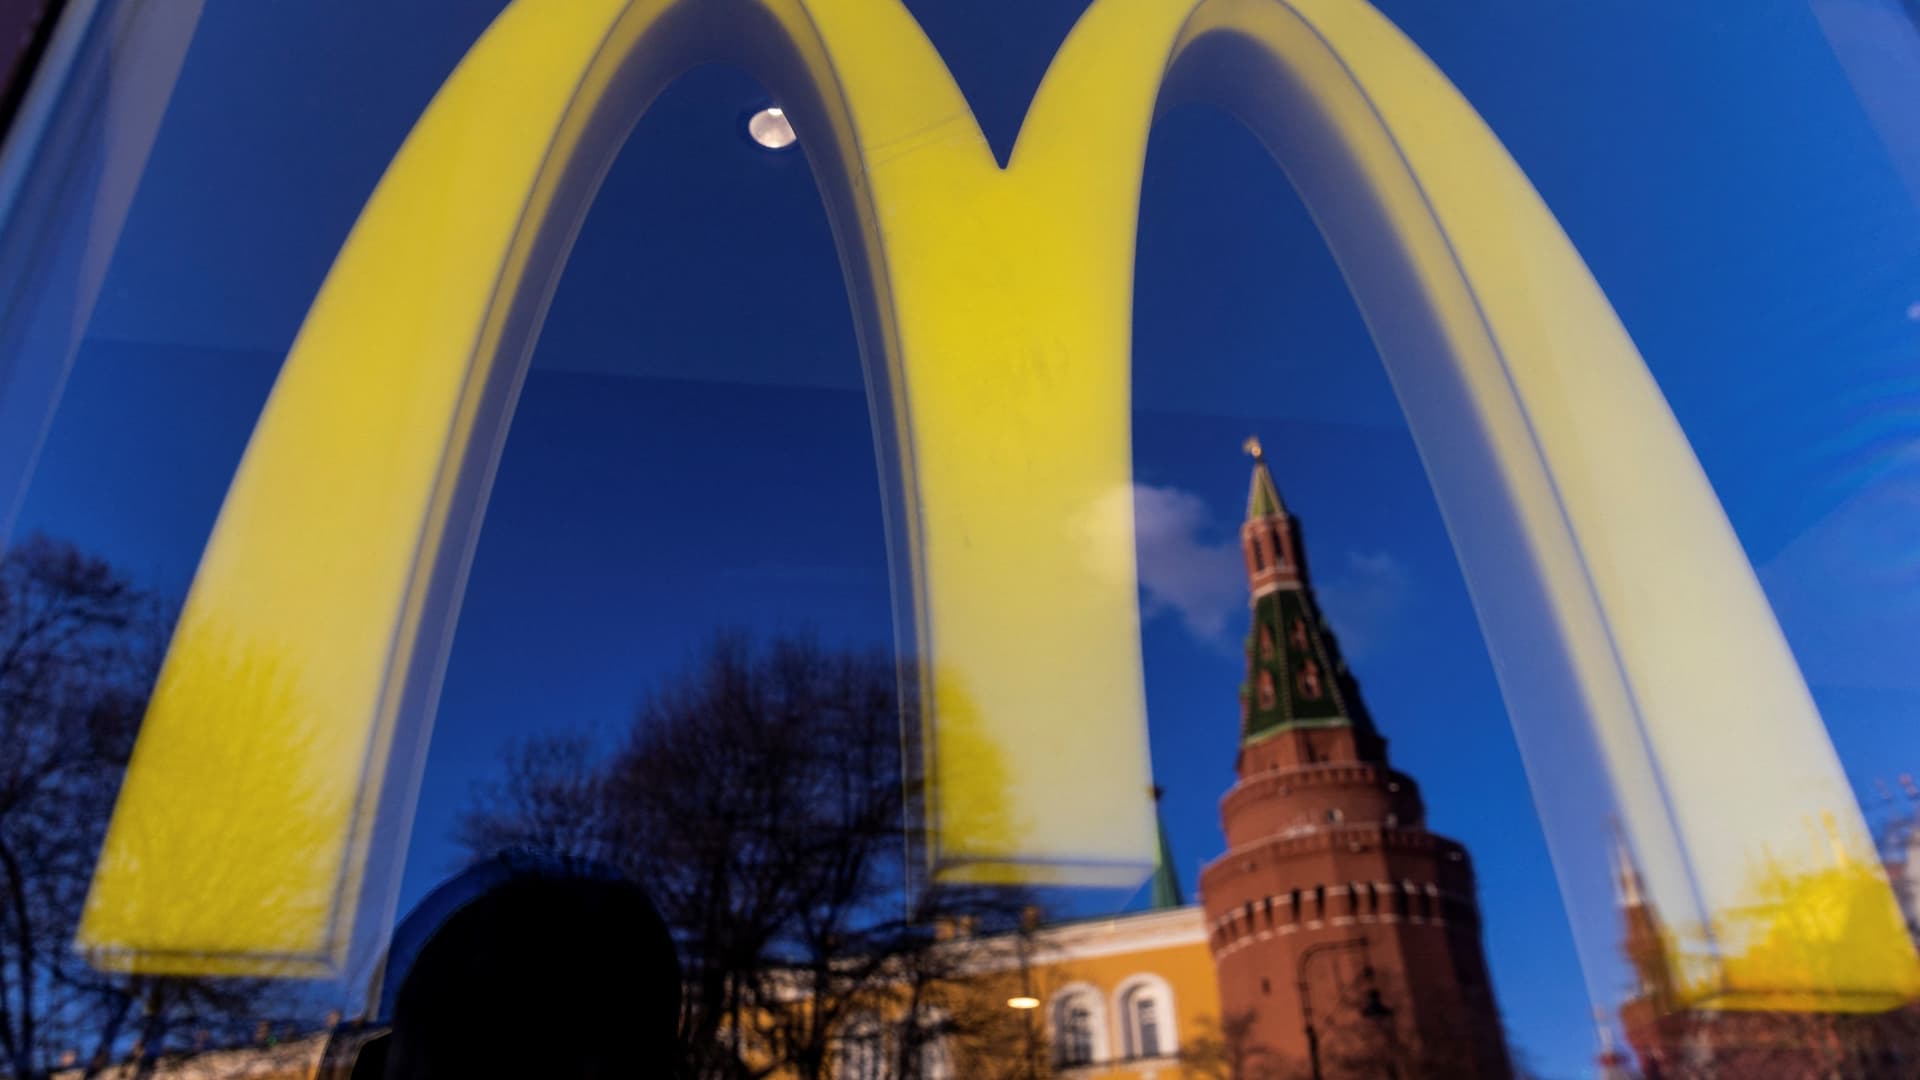 McDonald’s closures in Russia cost the fast-food giant $127 million in Q1 — here’s what it could mean for the country